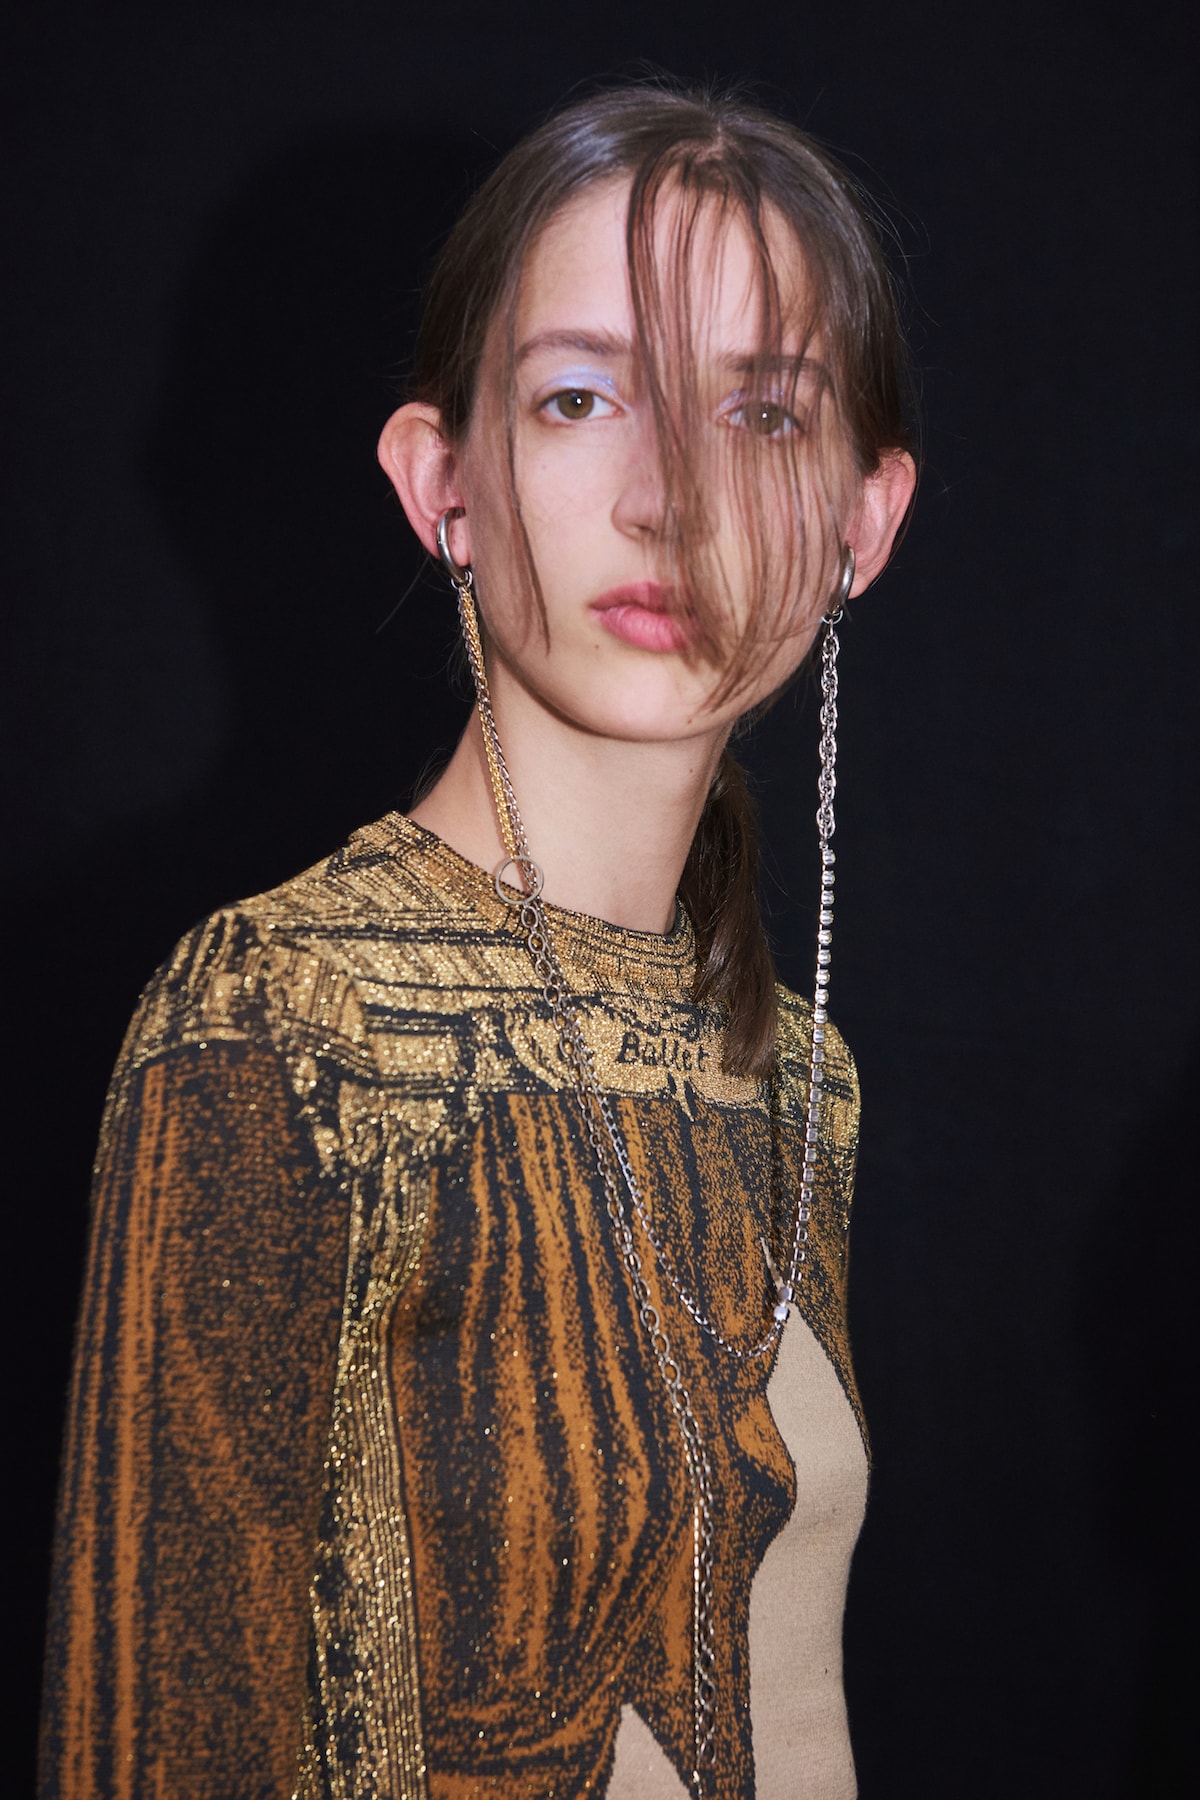 Acne Studios Spring/Summer 2019 Backstage Fashion Week Details Photography Accessories Jewelry Sunglasses